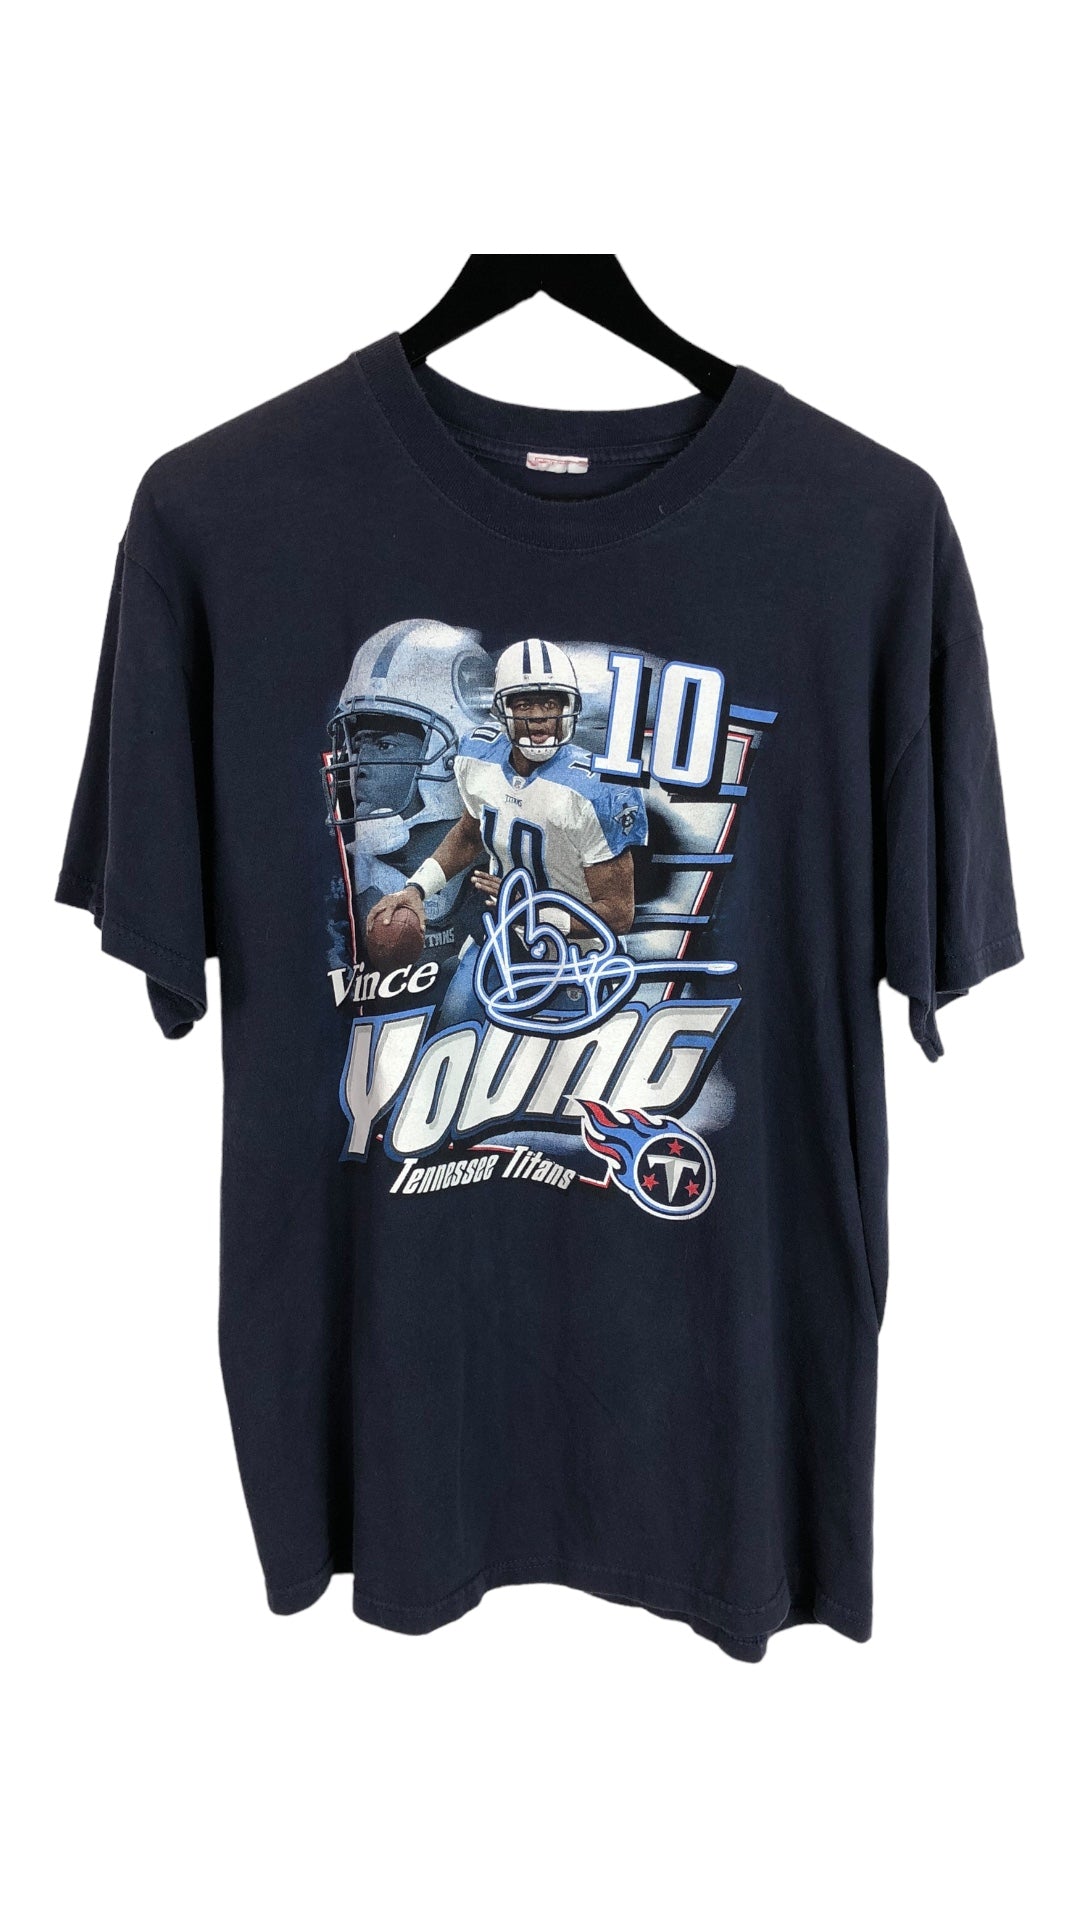 Tennessee Titans Vince Young Tee sz M/L